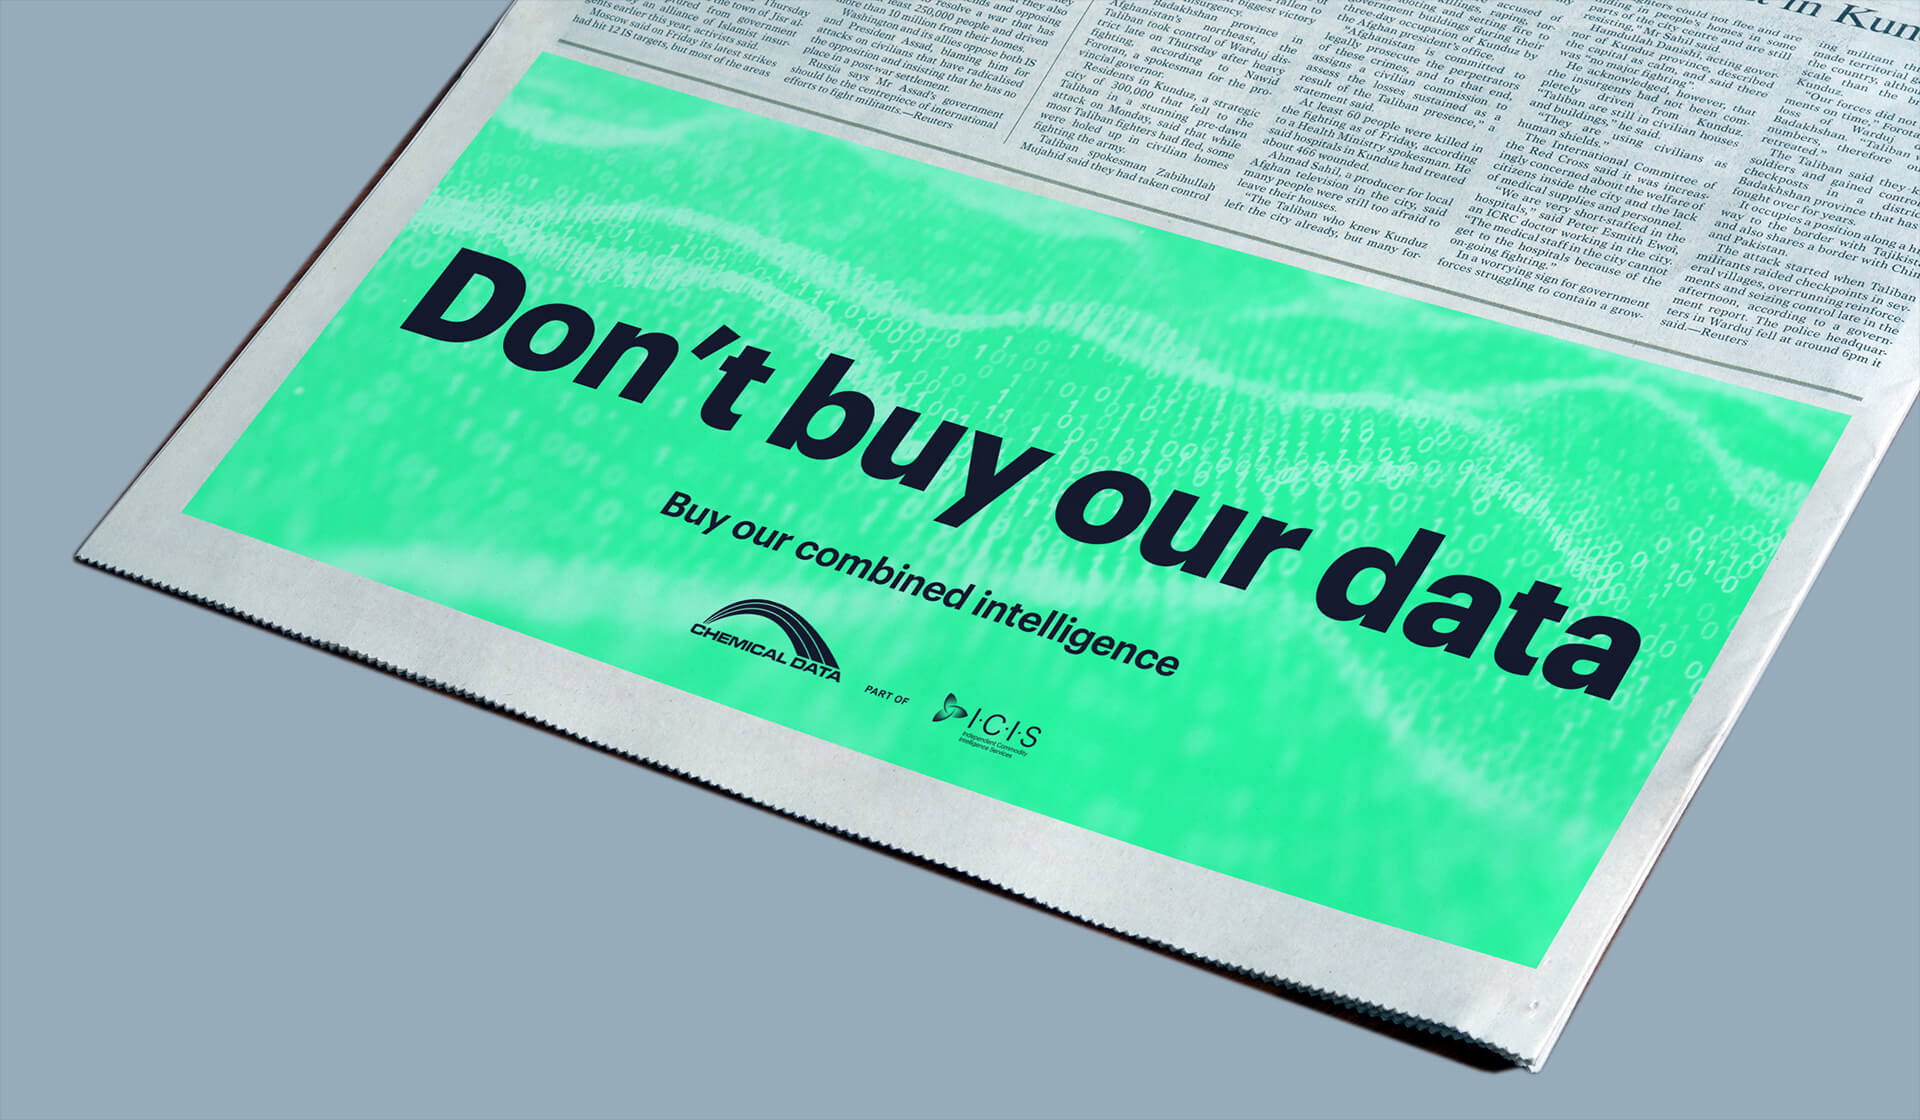 ICIS - Don't Buy Our Data - Mellor&Smith - B2B Ad Campaign - Printed Press - Trade Press - National Press